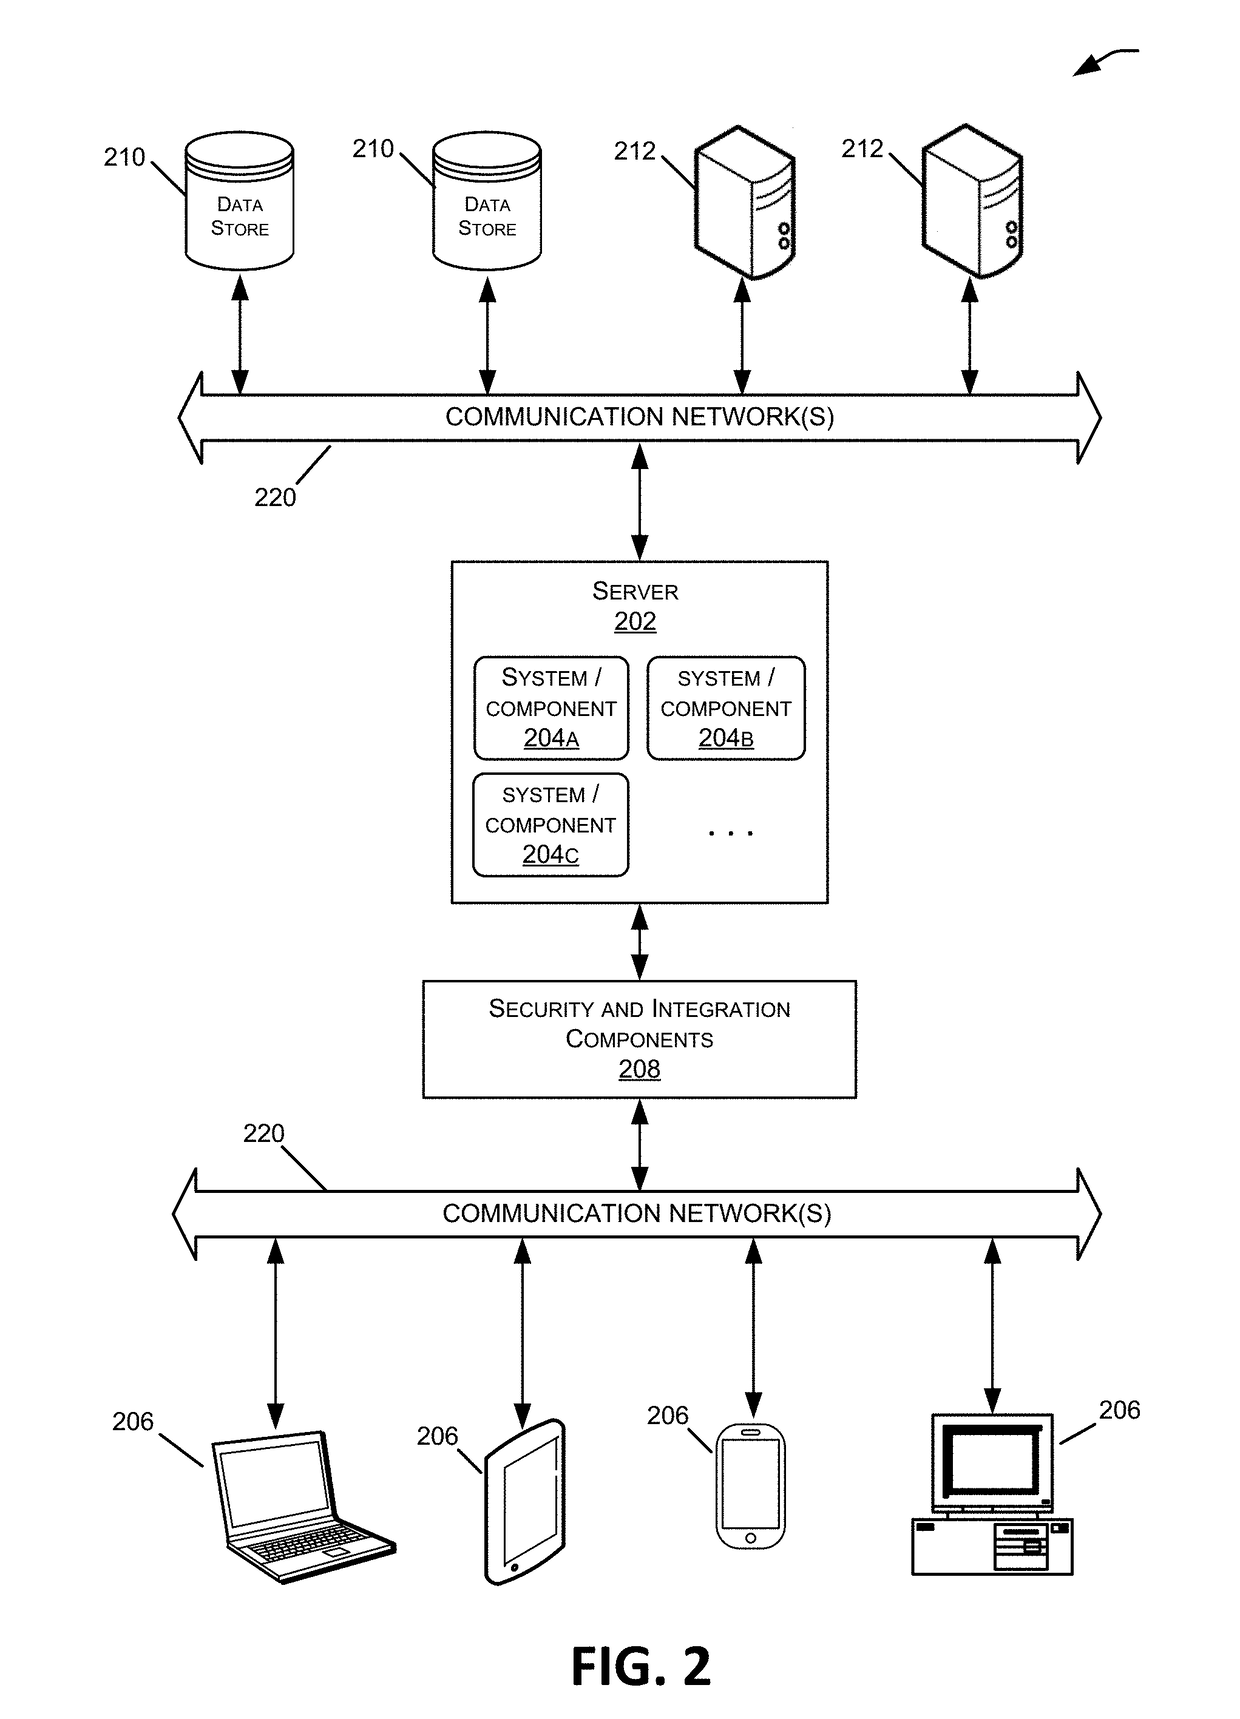 Monitoring physical simulations within a digital credential platform